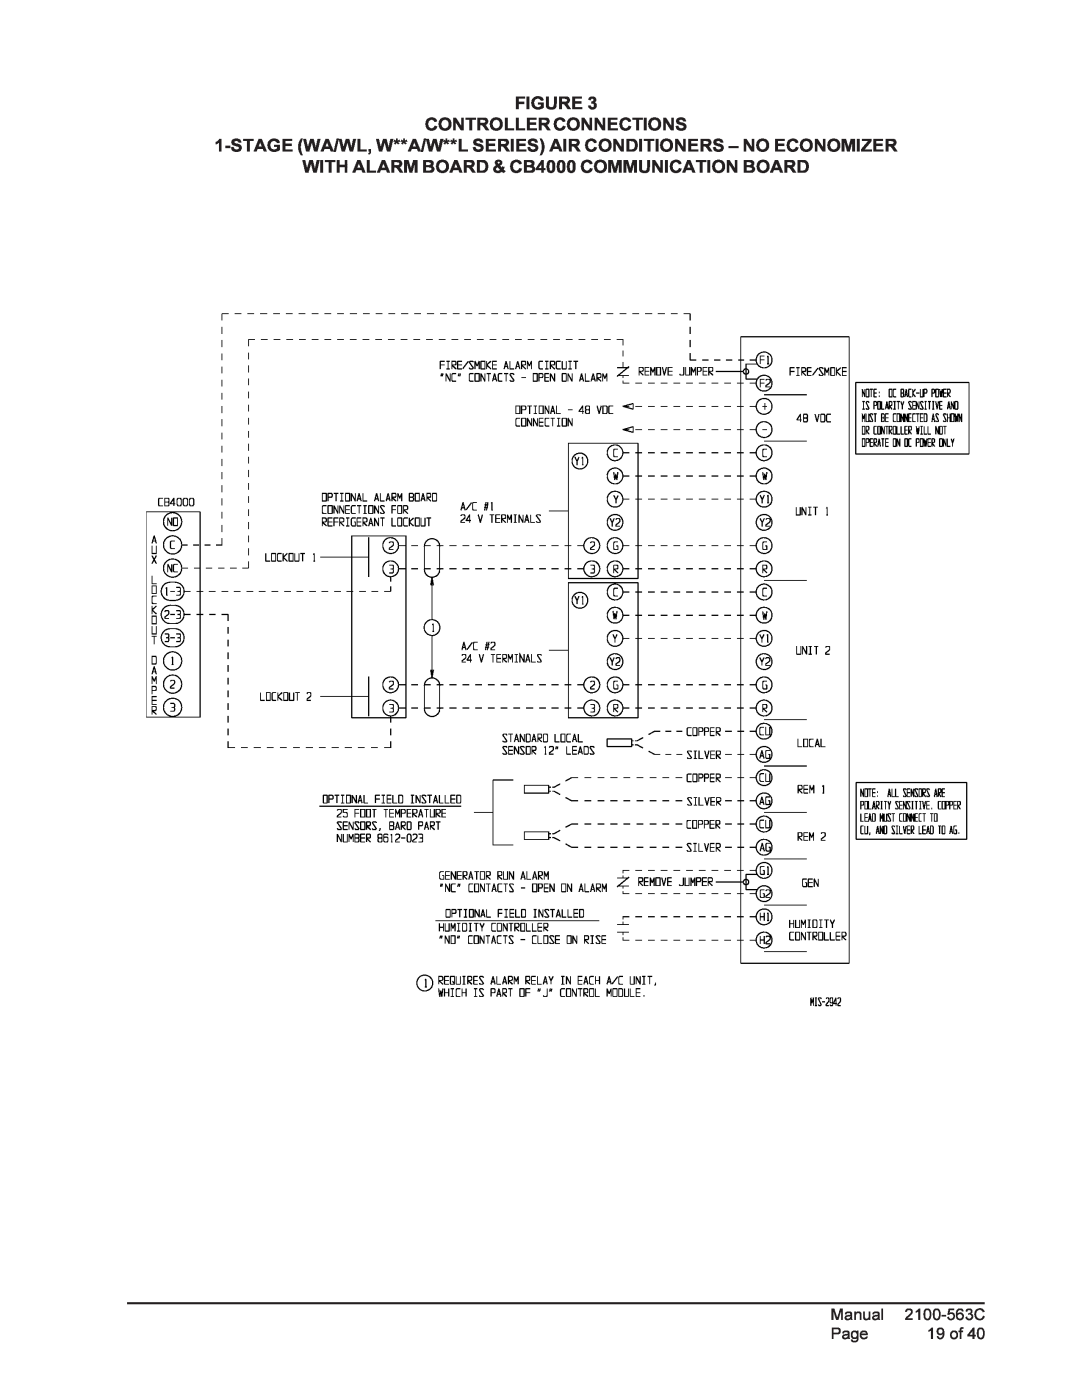 Bard MC4000 Figure Controllerconnections, WITH ALARM BOARD & CB4000 COMMUNICATION BOARD, Manual, Page, 19 of, 2100-563C 